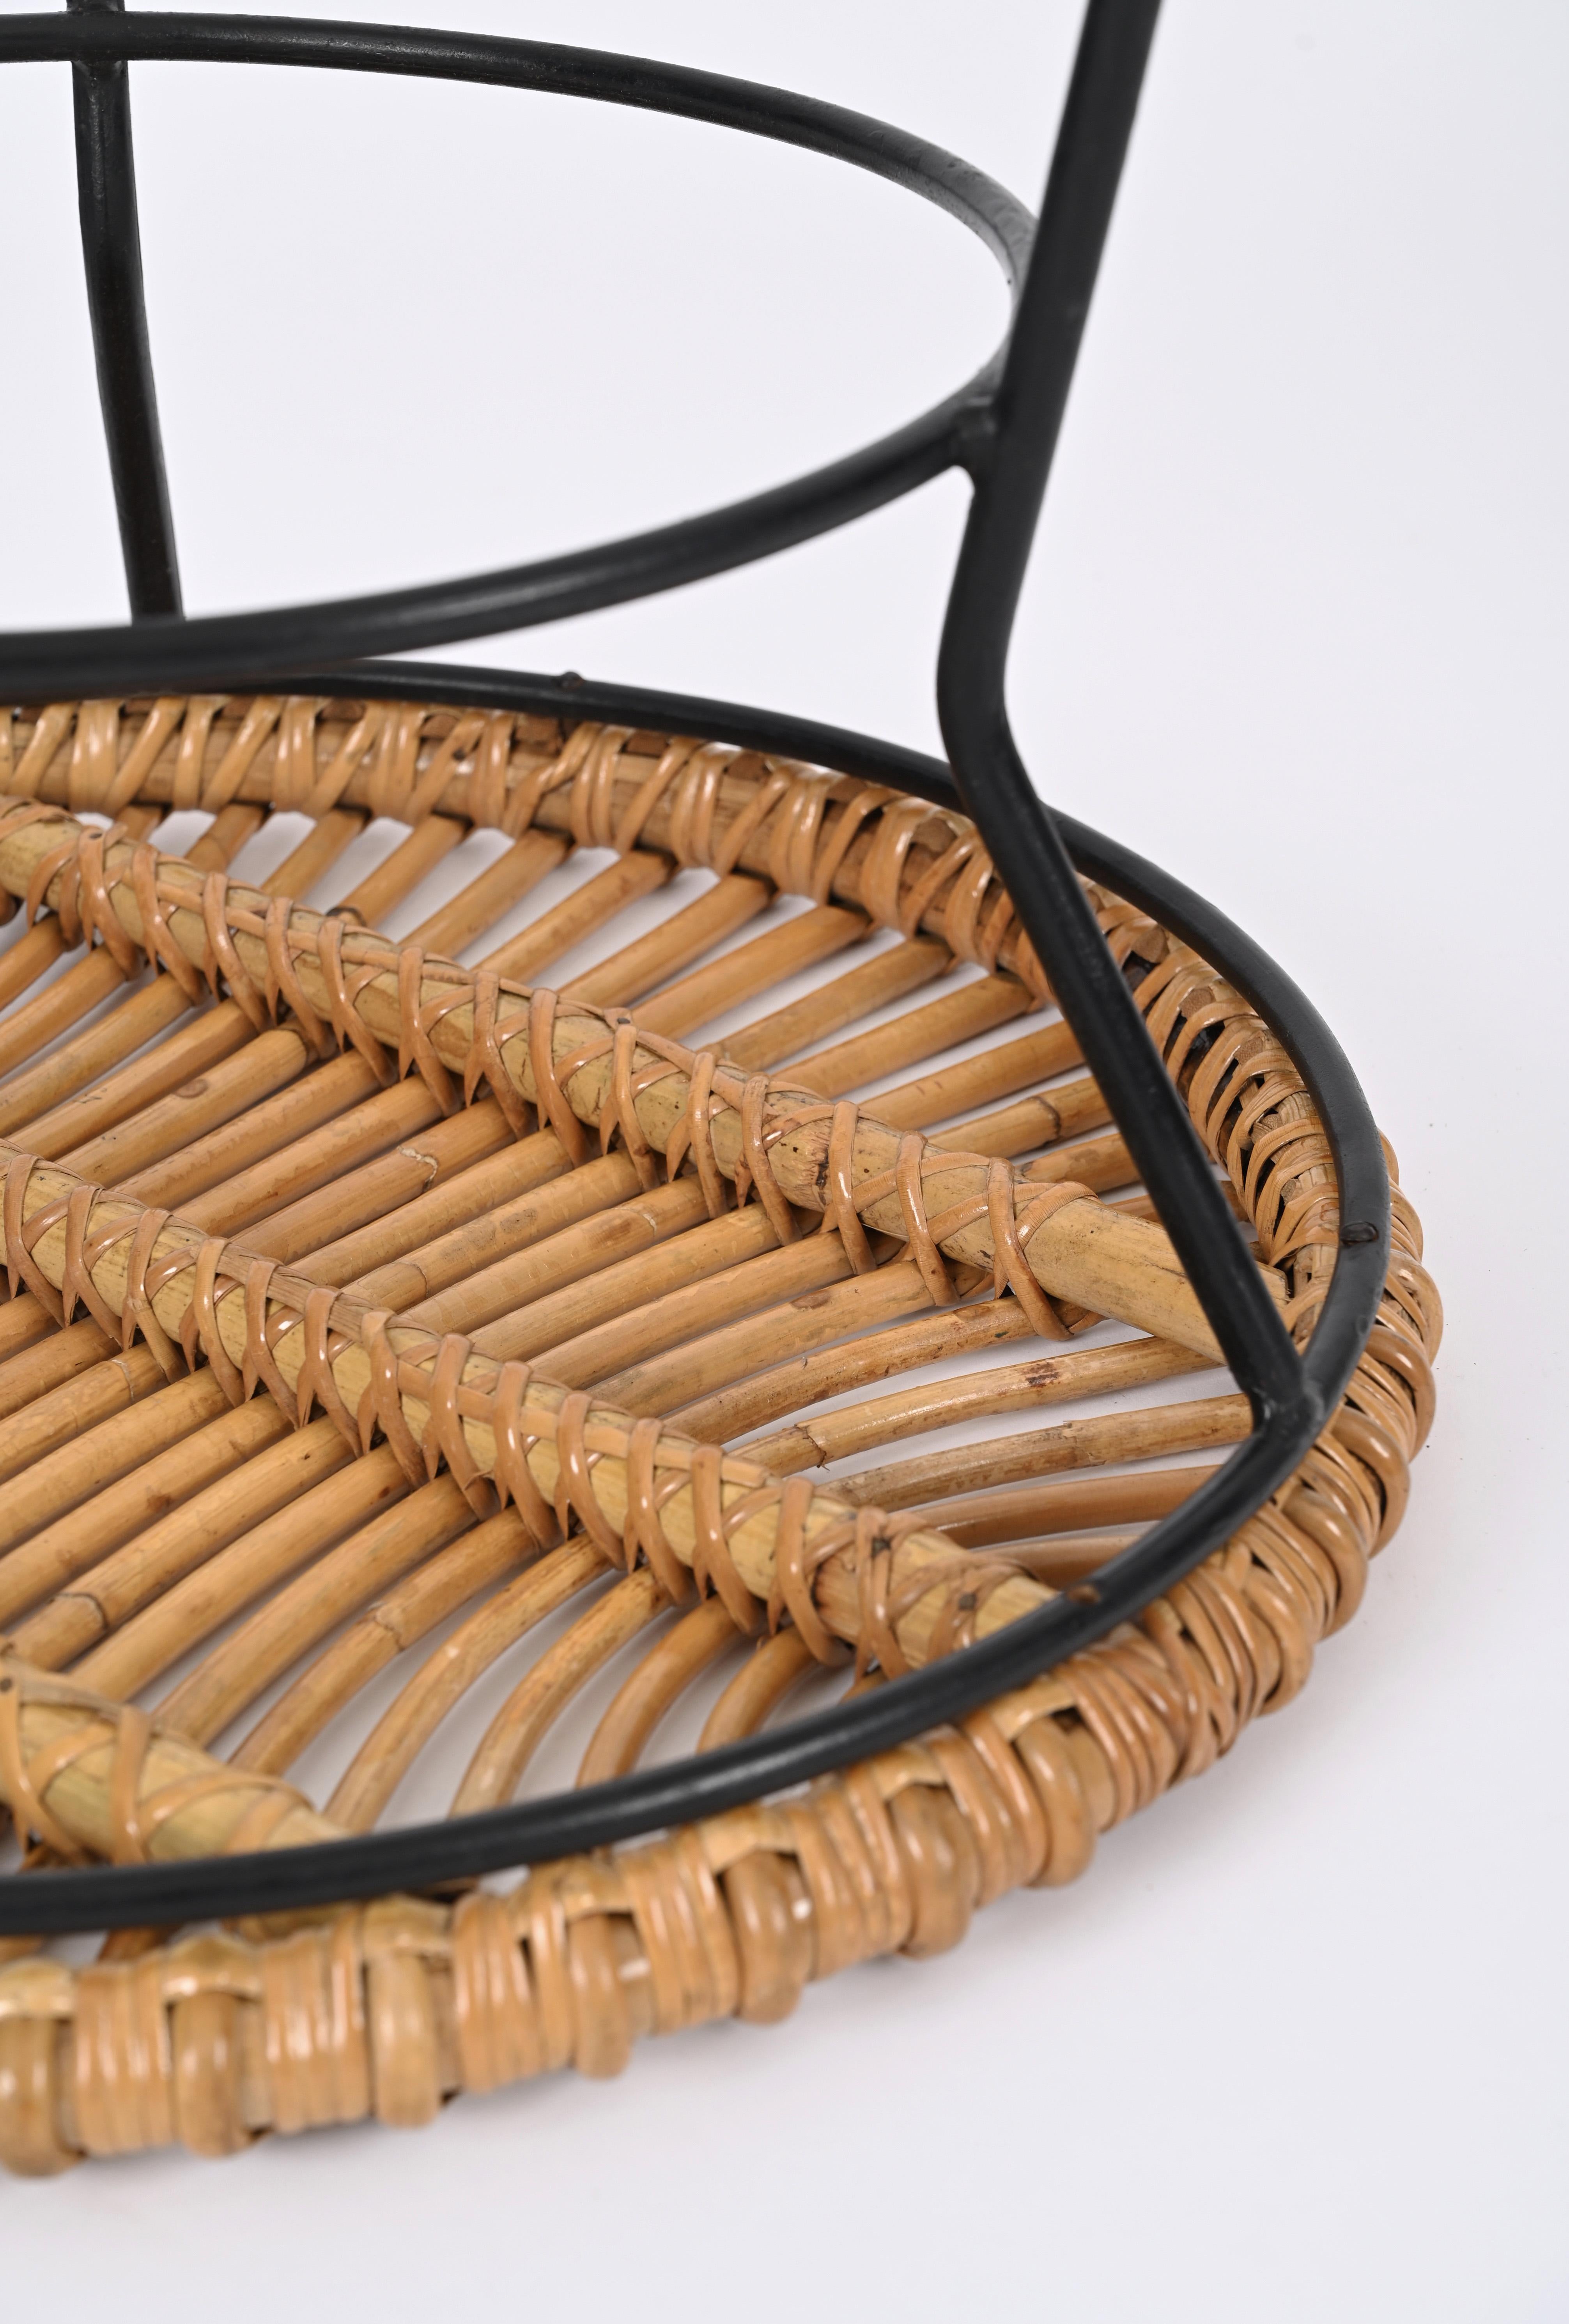 French Riviera Rattan, Wicker and Iron Coffee Table, Roberto Mango, Italy 1960s For Sale 5